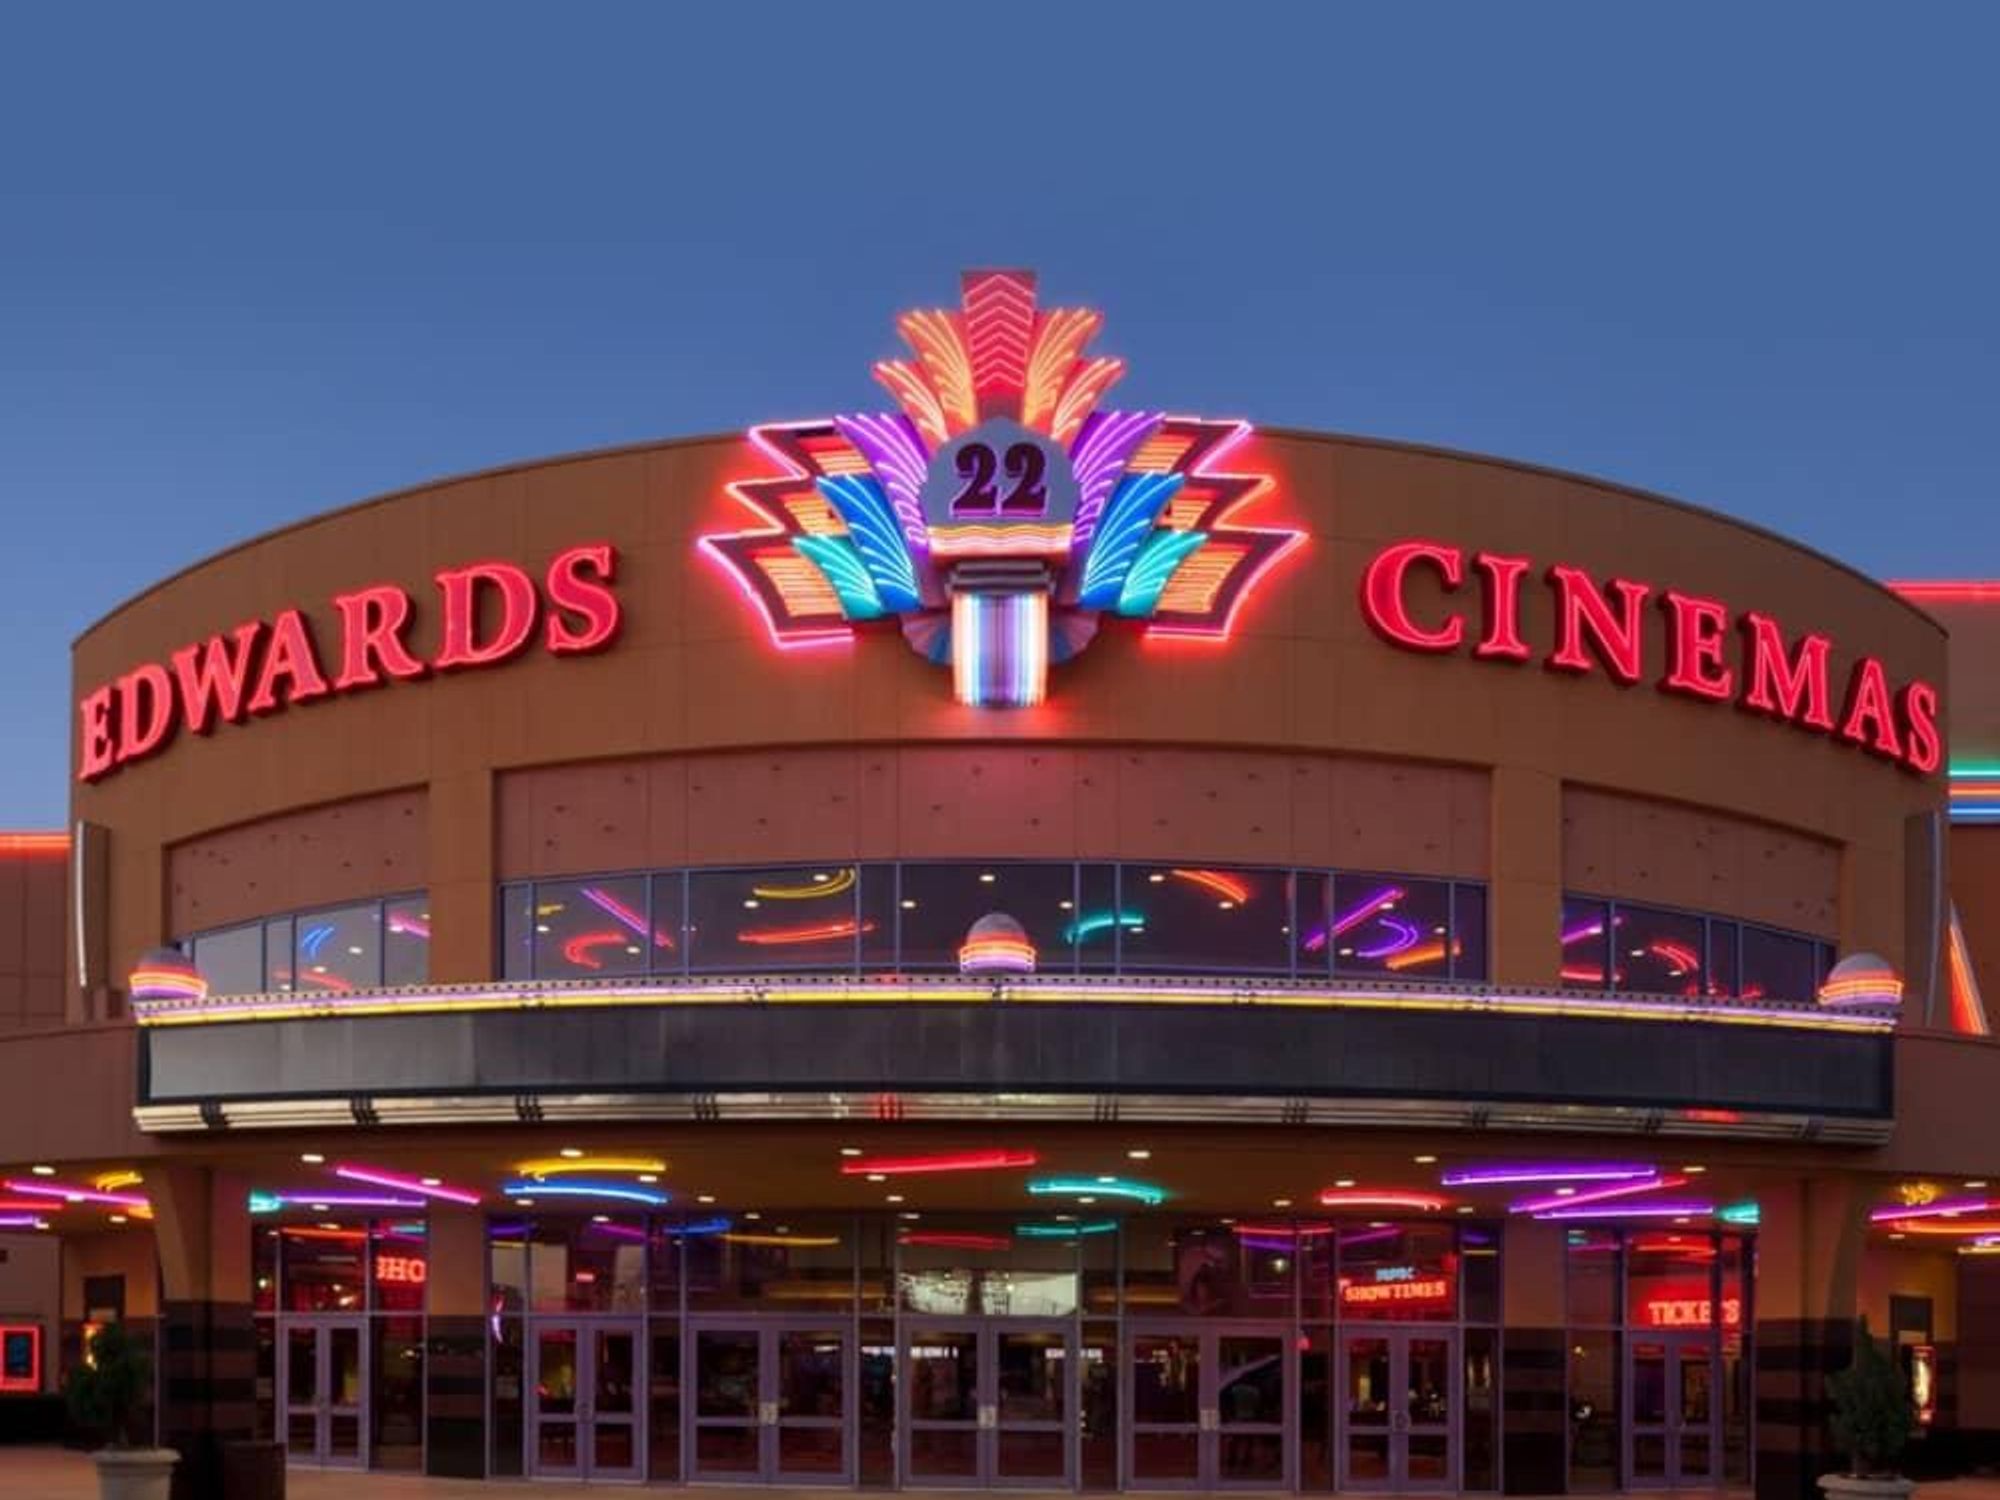 5 Houston movie theaters as chain Houston suspends operations - CultureMap close major temporarily